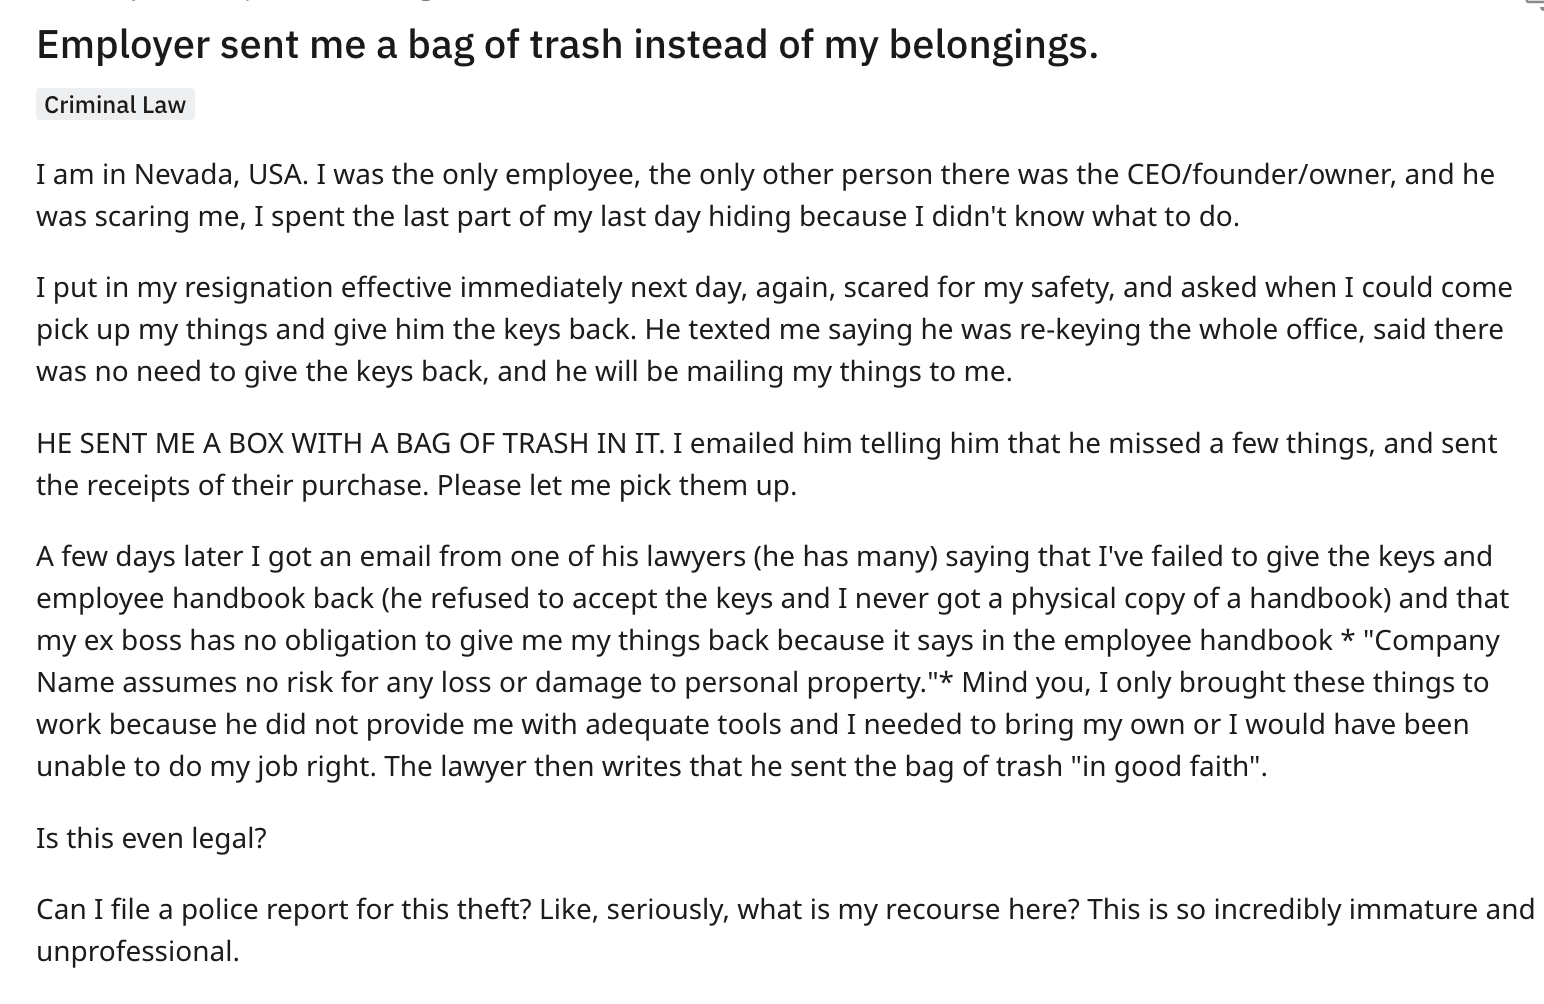 document - Employer sent me a bag of trash instead of my belongings. Criminal Law I am in Nevada, Usa. I was the only employee, the only other person there was the Ceofounderowner, and he was scaring me, I spent the last part of my last day hiding because